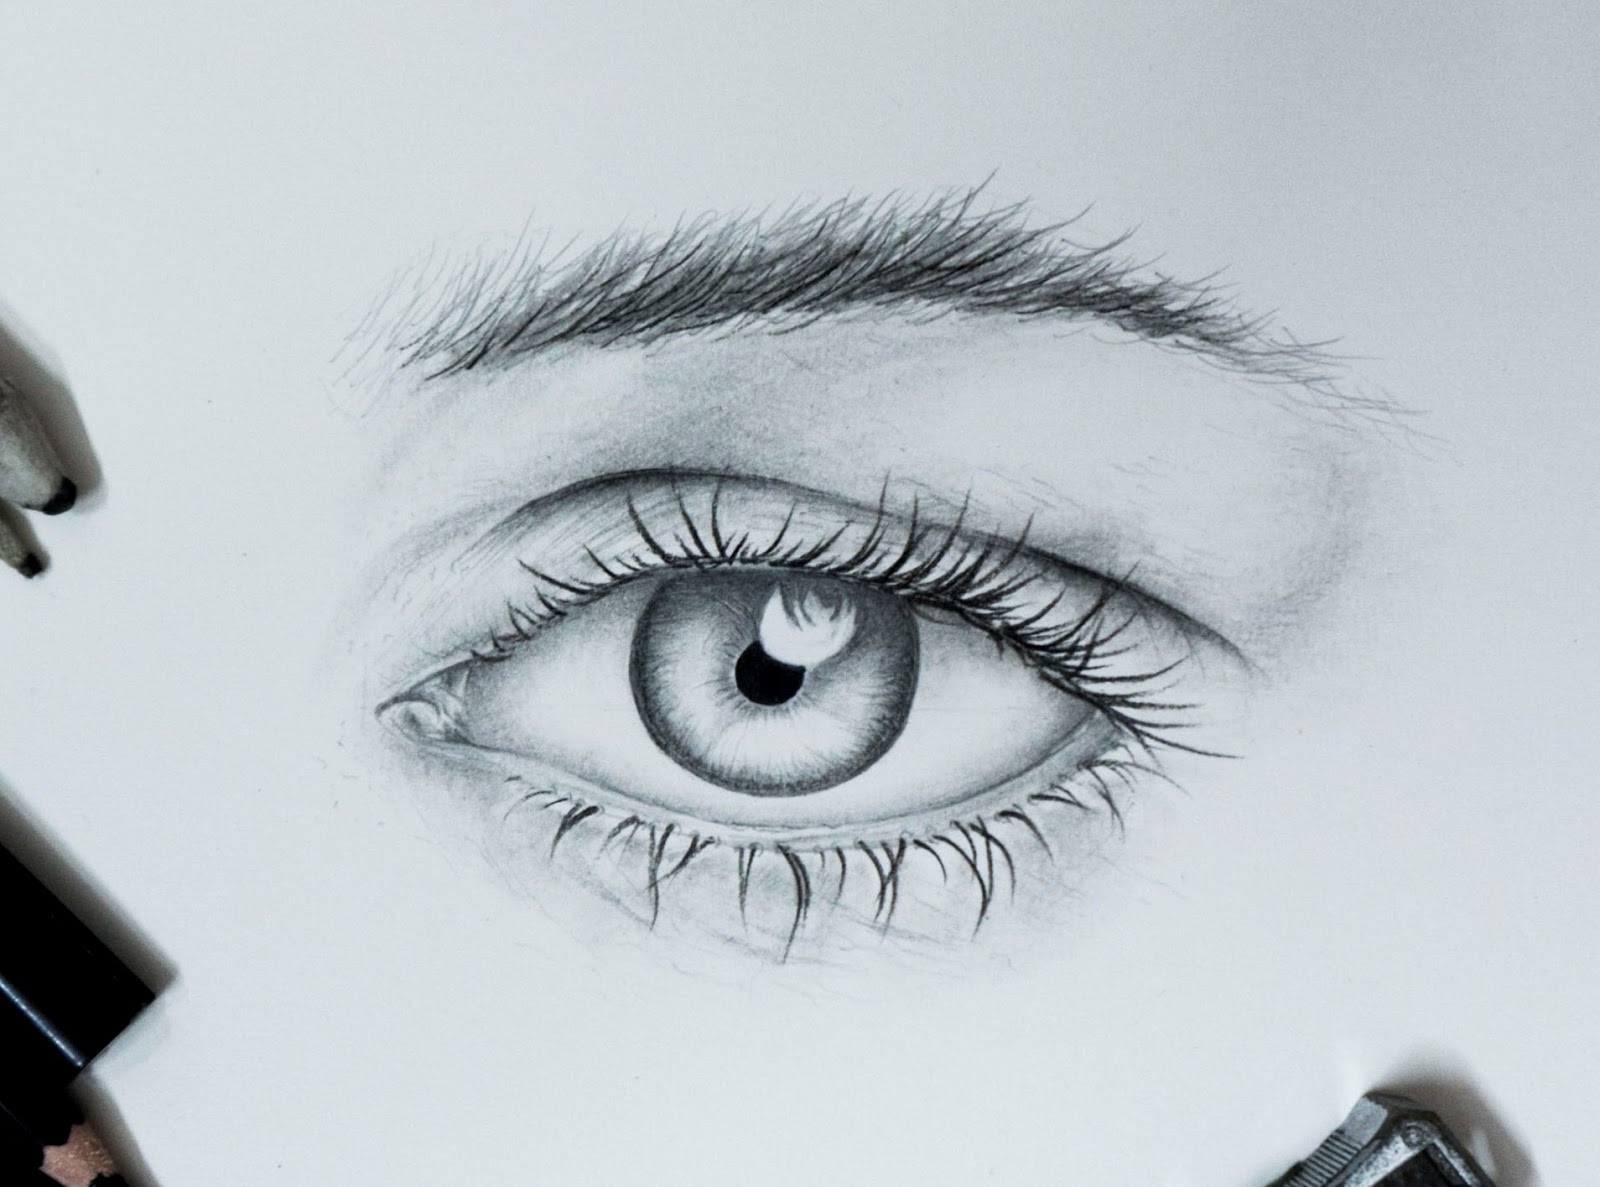 HOW TO DRAW EYES STEP BY STEP EASILY | UNIQUE ART BLOGS Unique Eye Drawings